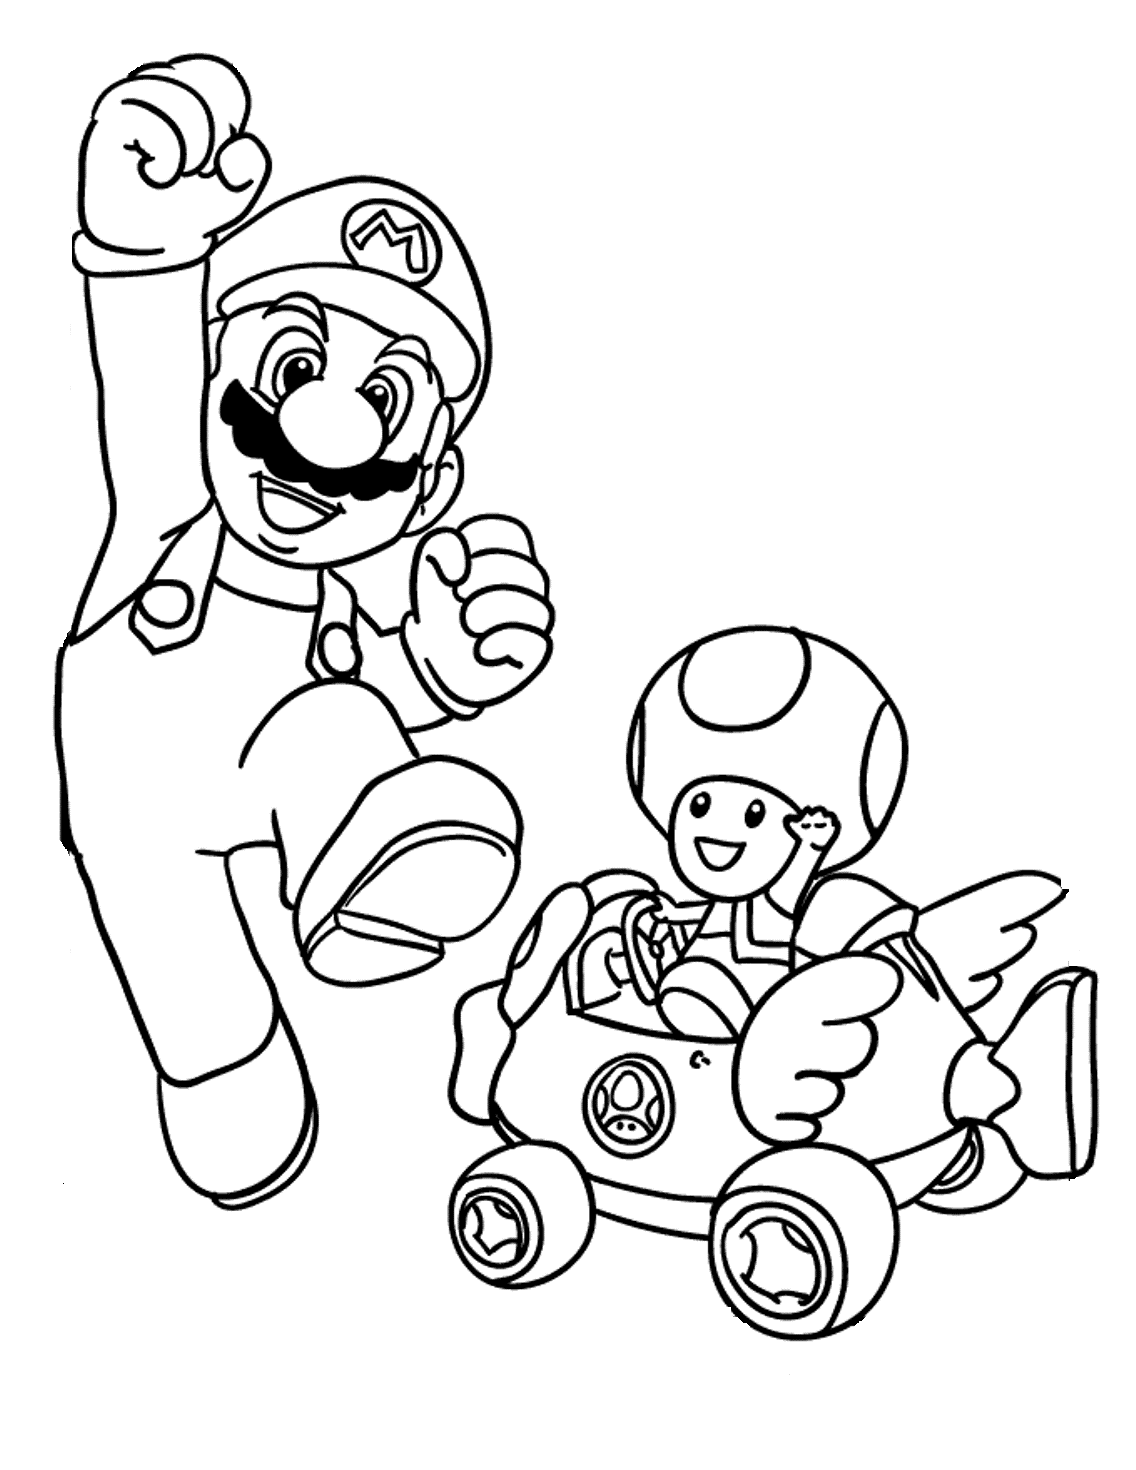 Coloring Pages For Kids Super Mario Super Mario Coloring Pages Super 